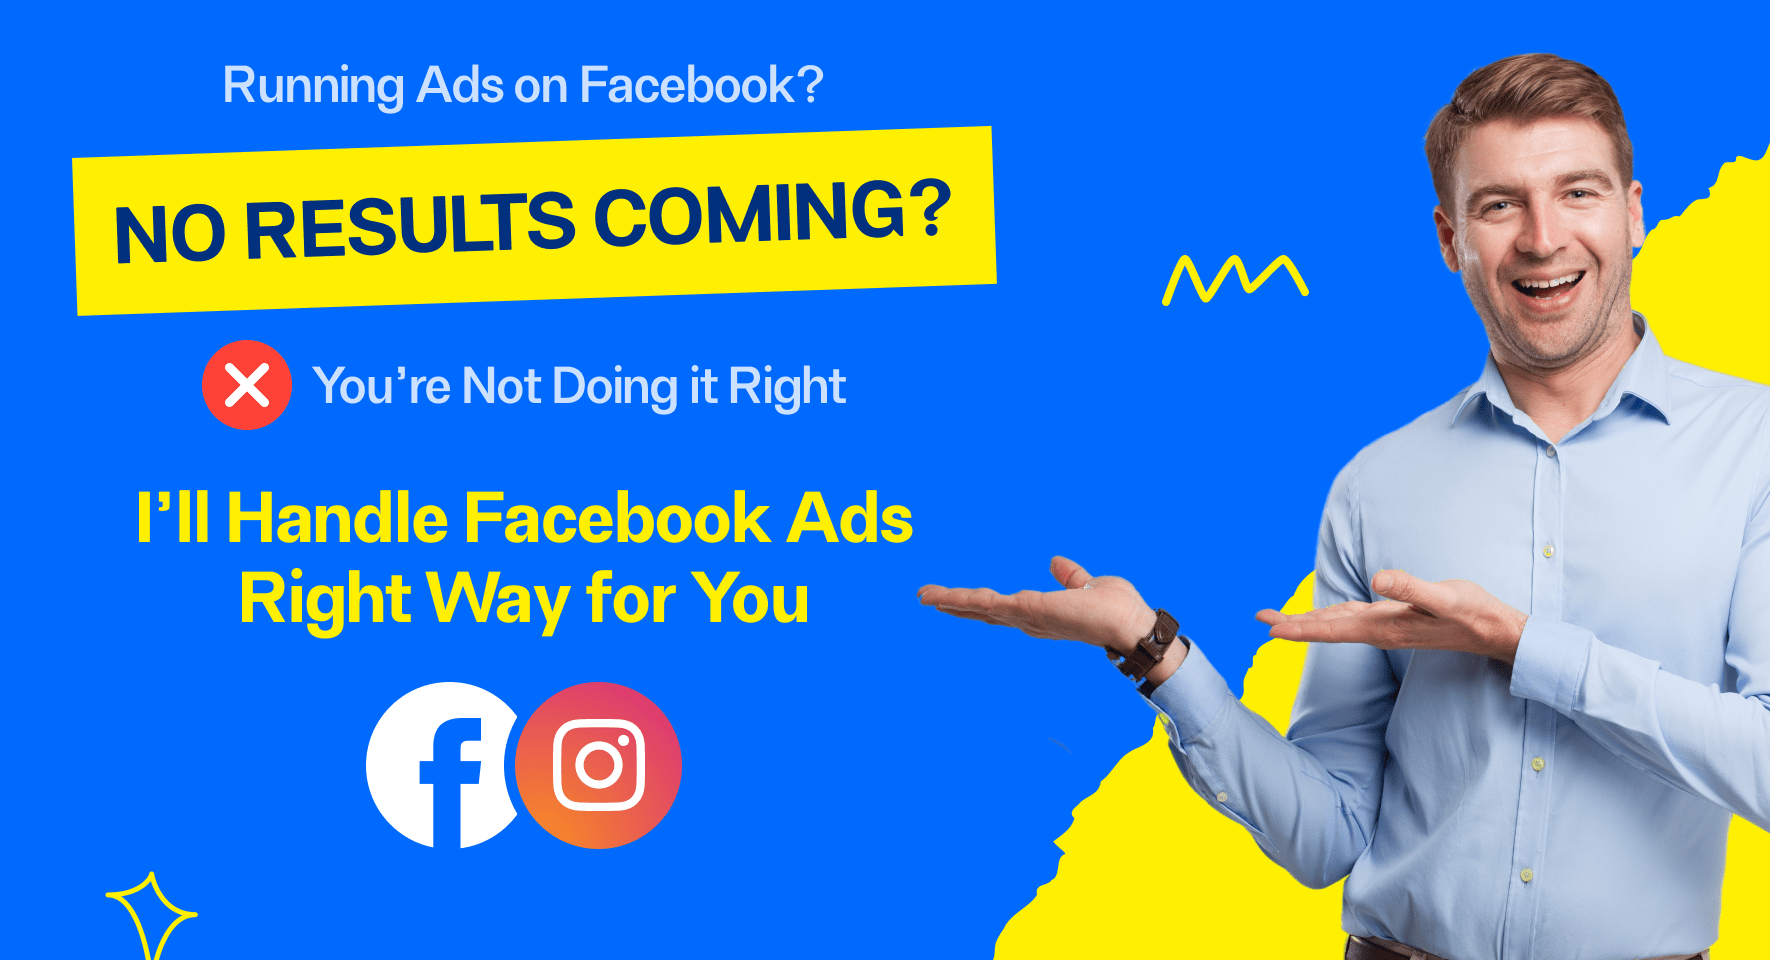 I will be your Facebook campaign manager to run Shopify Facebook ads